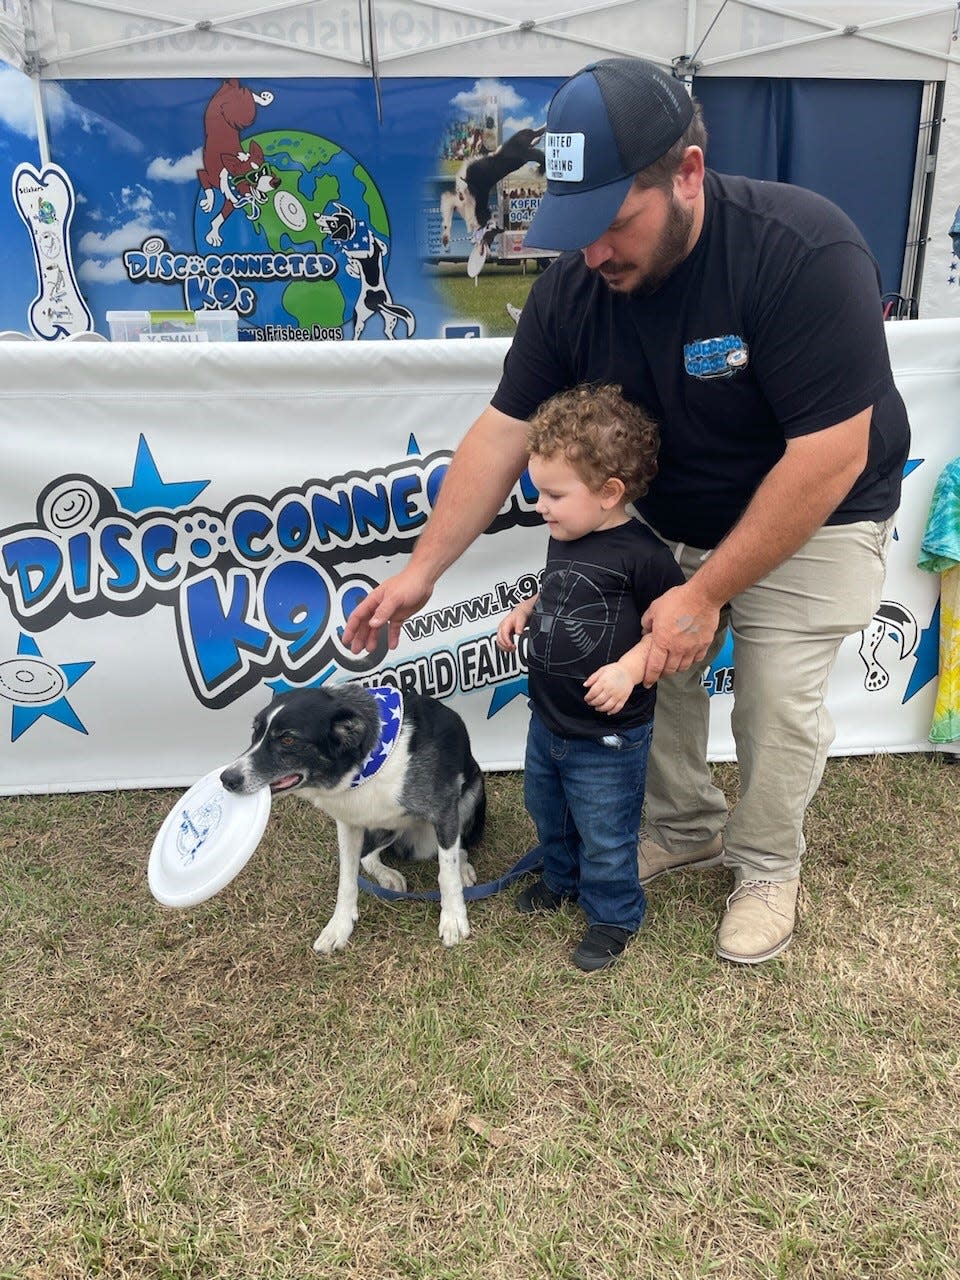 Disconnected K9's dog show has been a part of the Orange City Blue Springs Manatee Festival for about 20 years.